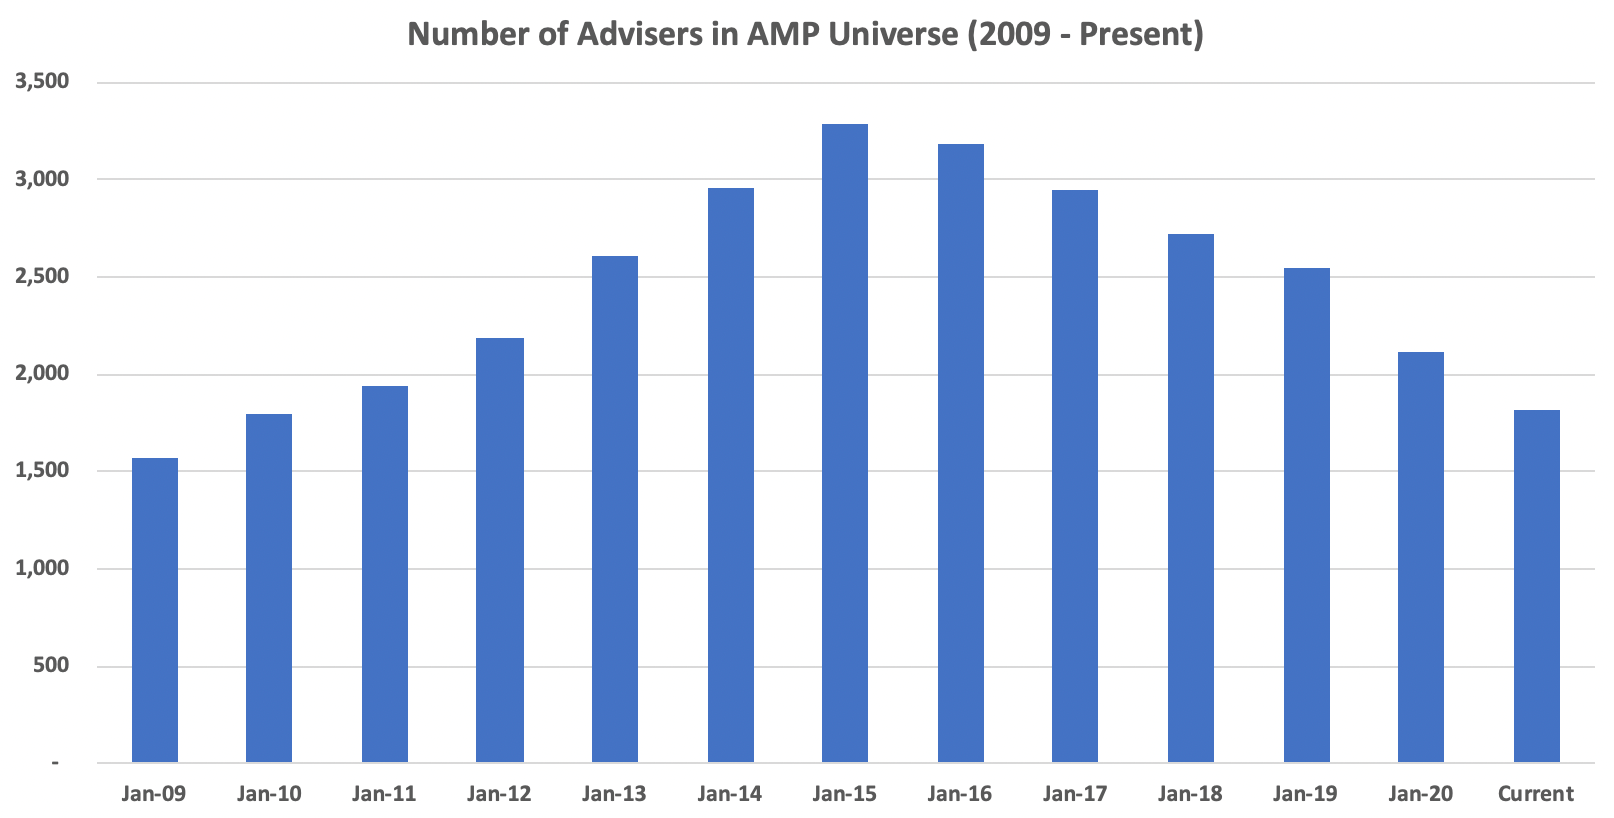 Number of Advisers in AMP universe